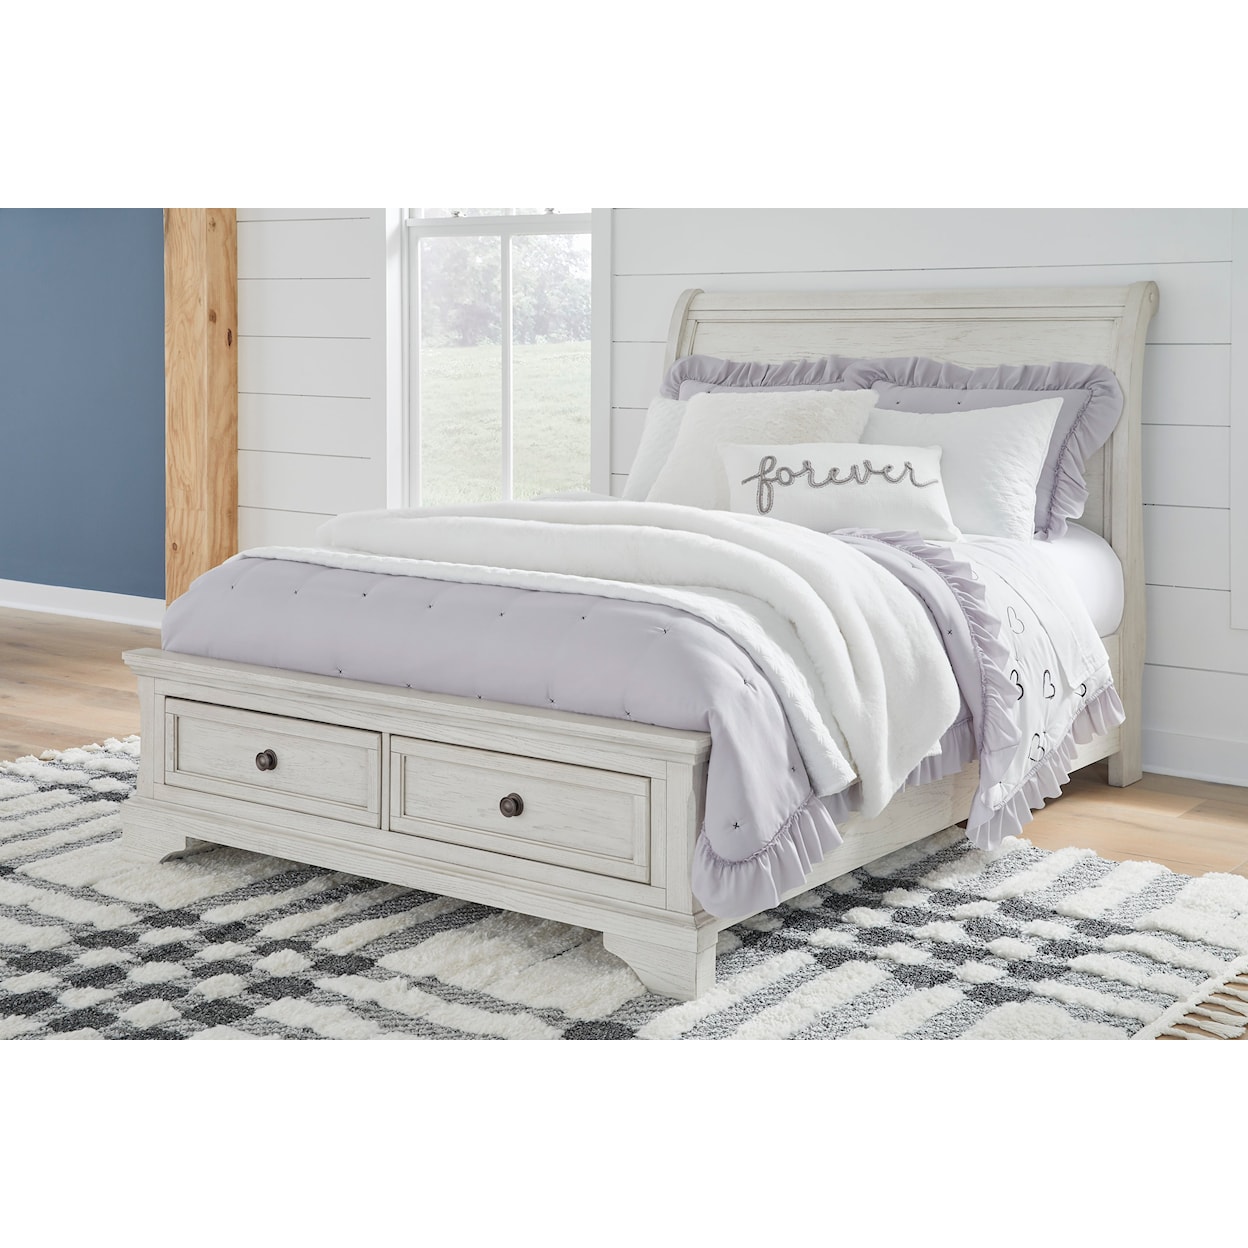 Signature Design Robbinsdale Full Sleigh Bed with Storage